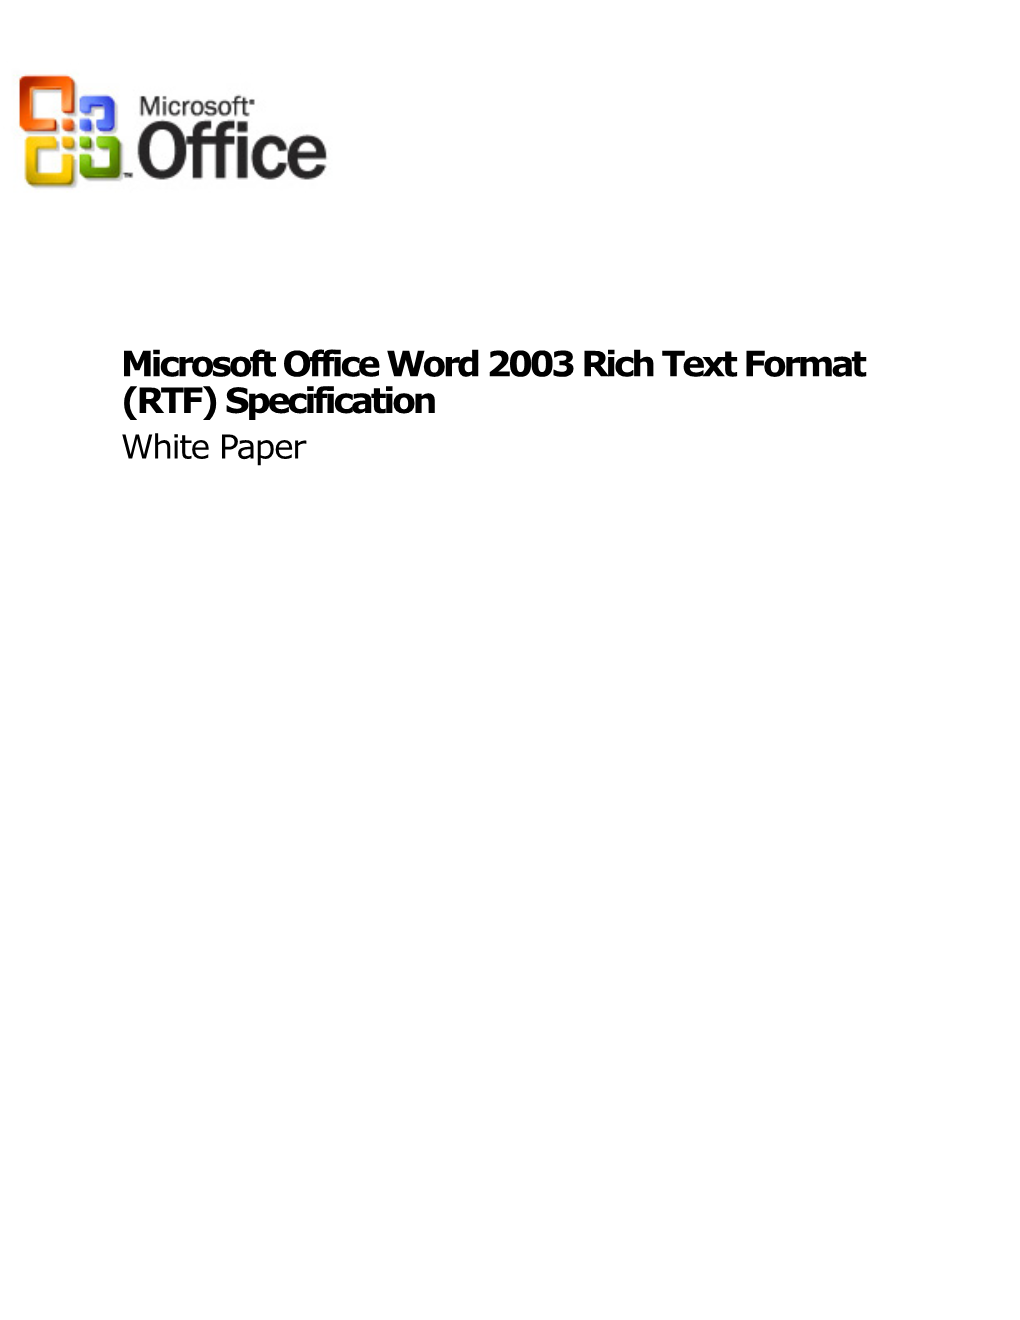 Microsoft Office Word 2003 Rich Text Format (RTF) Specification White Paper Published: April 2004 Table of Contents